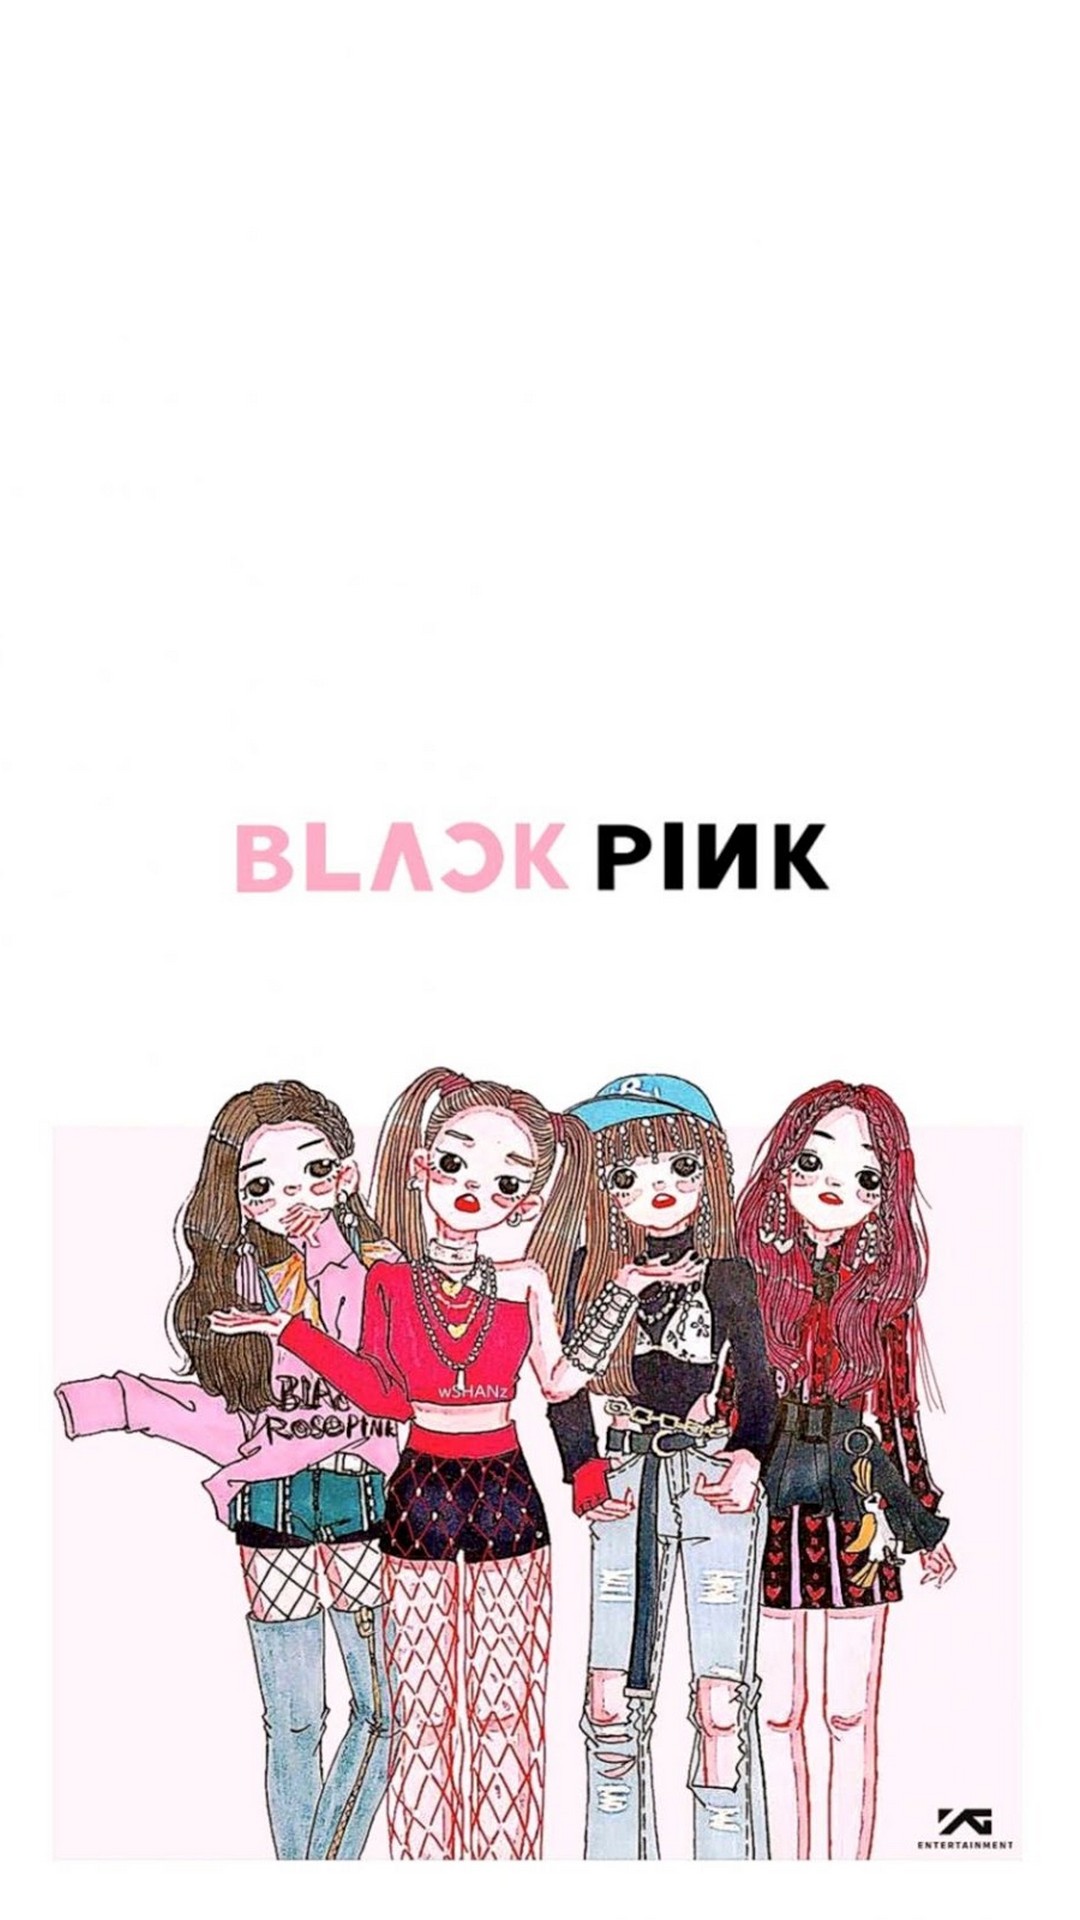 Android Wallpaper K-POP Blackpink with high-resolution 1080x1920 pixel. You can use this wallpaper for your Android backgrounds, Tablet, Samsung Screensavers, Mobile Phone Lock Screen and another Smartphones device